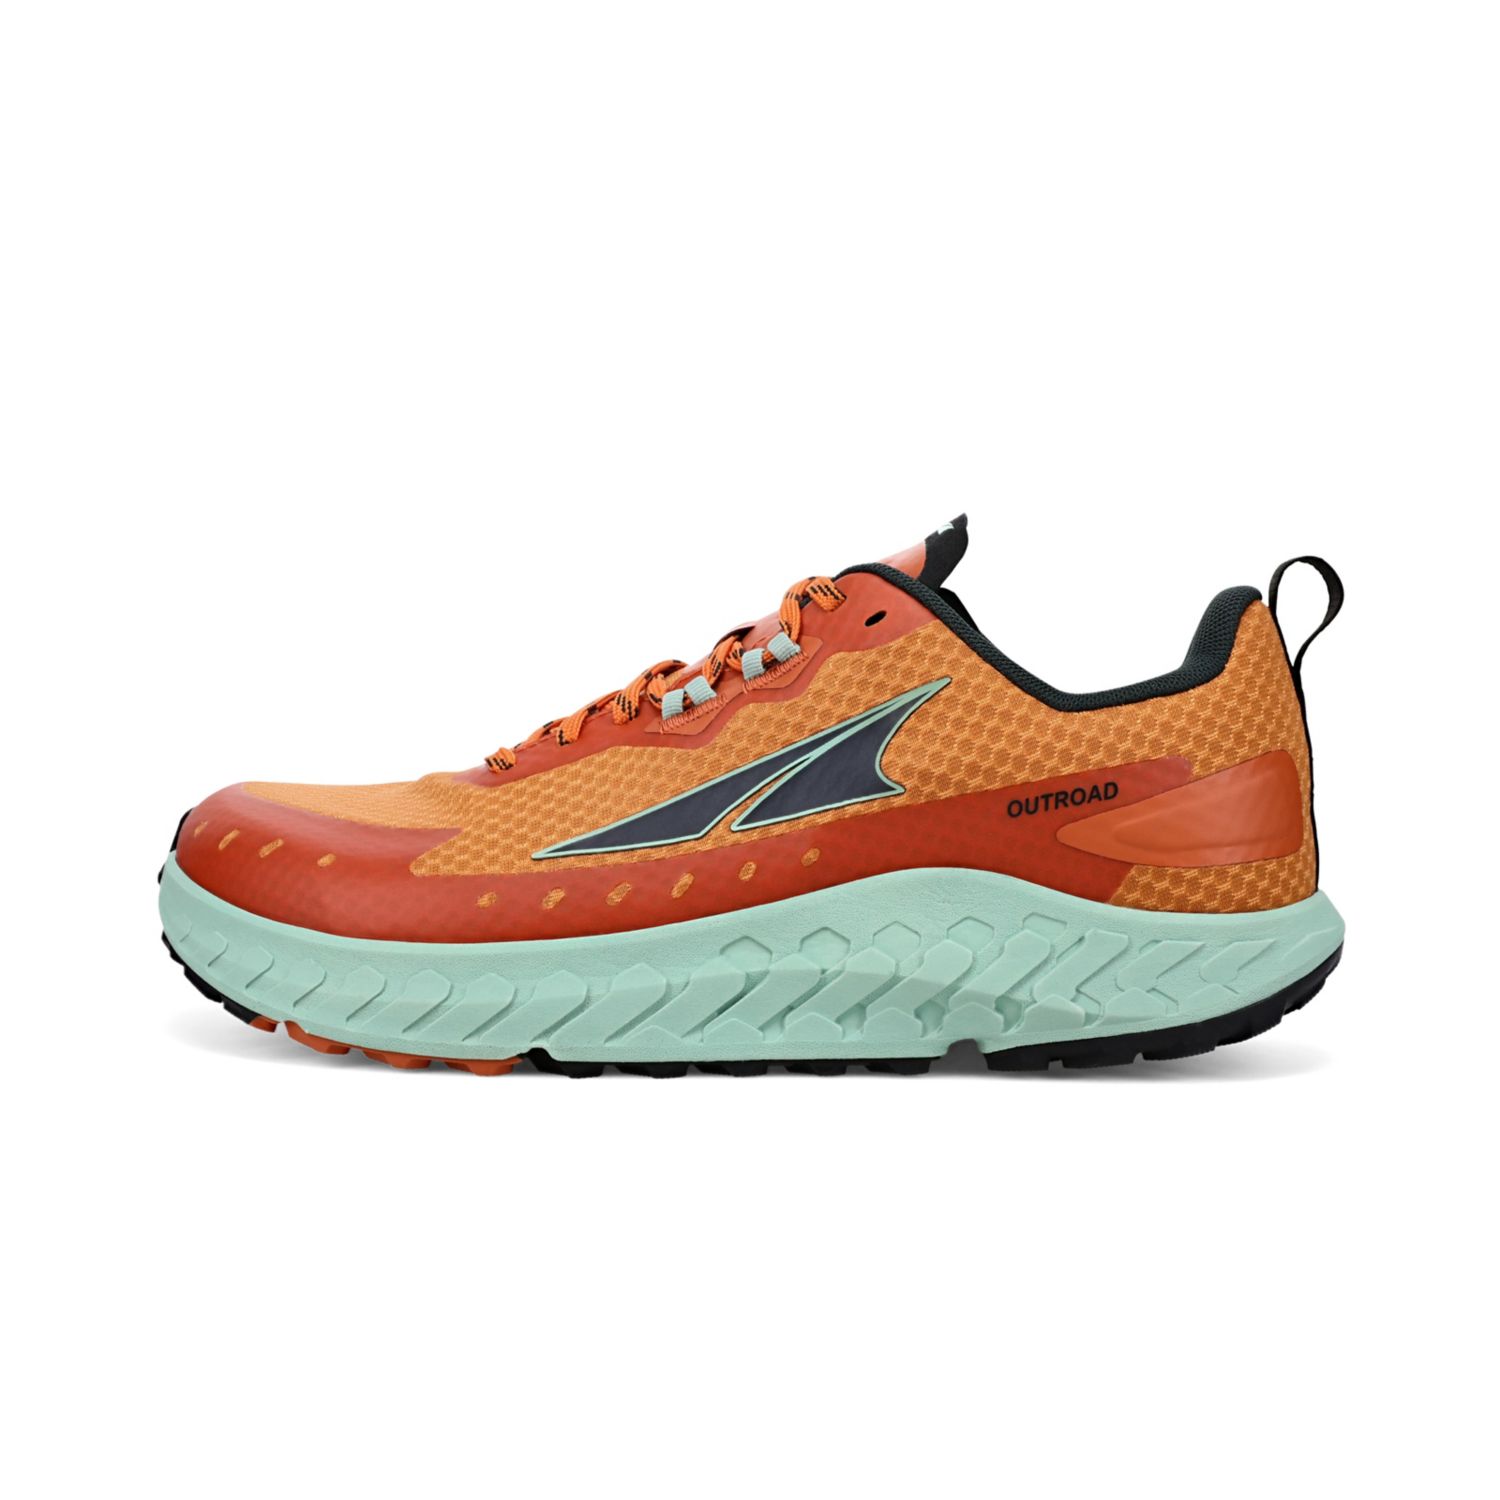 Green / Orange Altra Outroad Men's Trail Running Shoes | Ireland-64273059